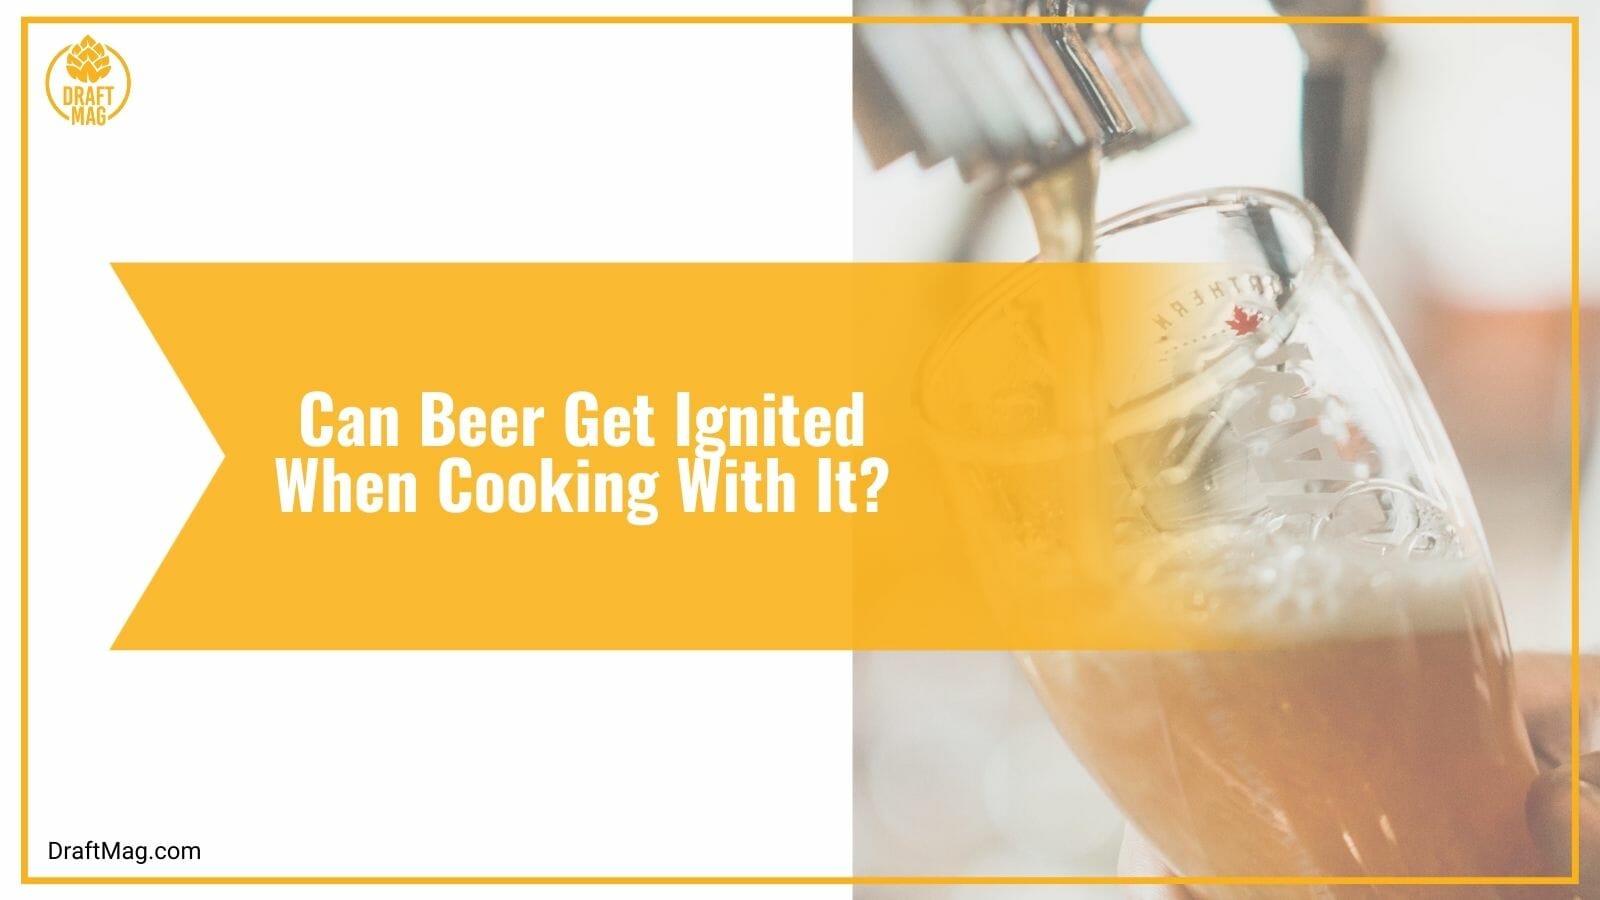 Can Beer Get Ignited When Cooking With It